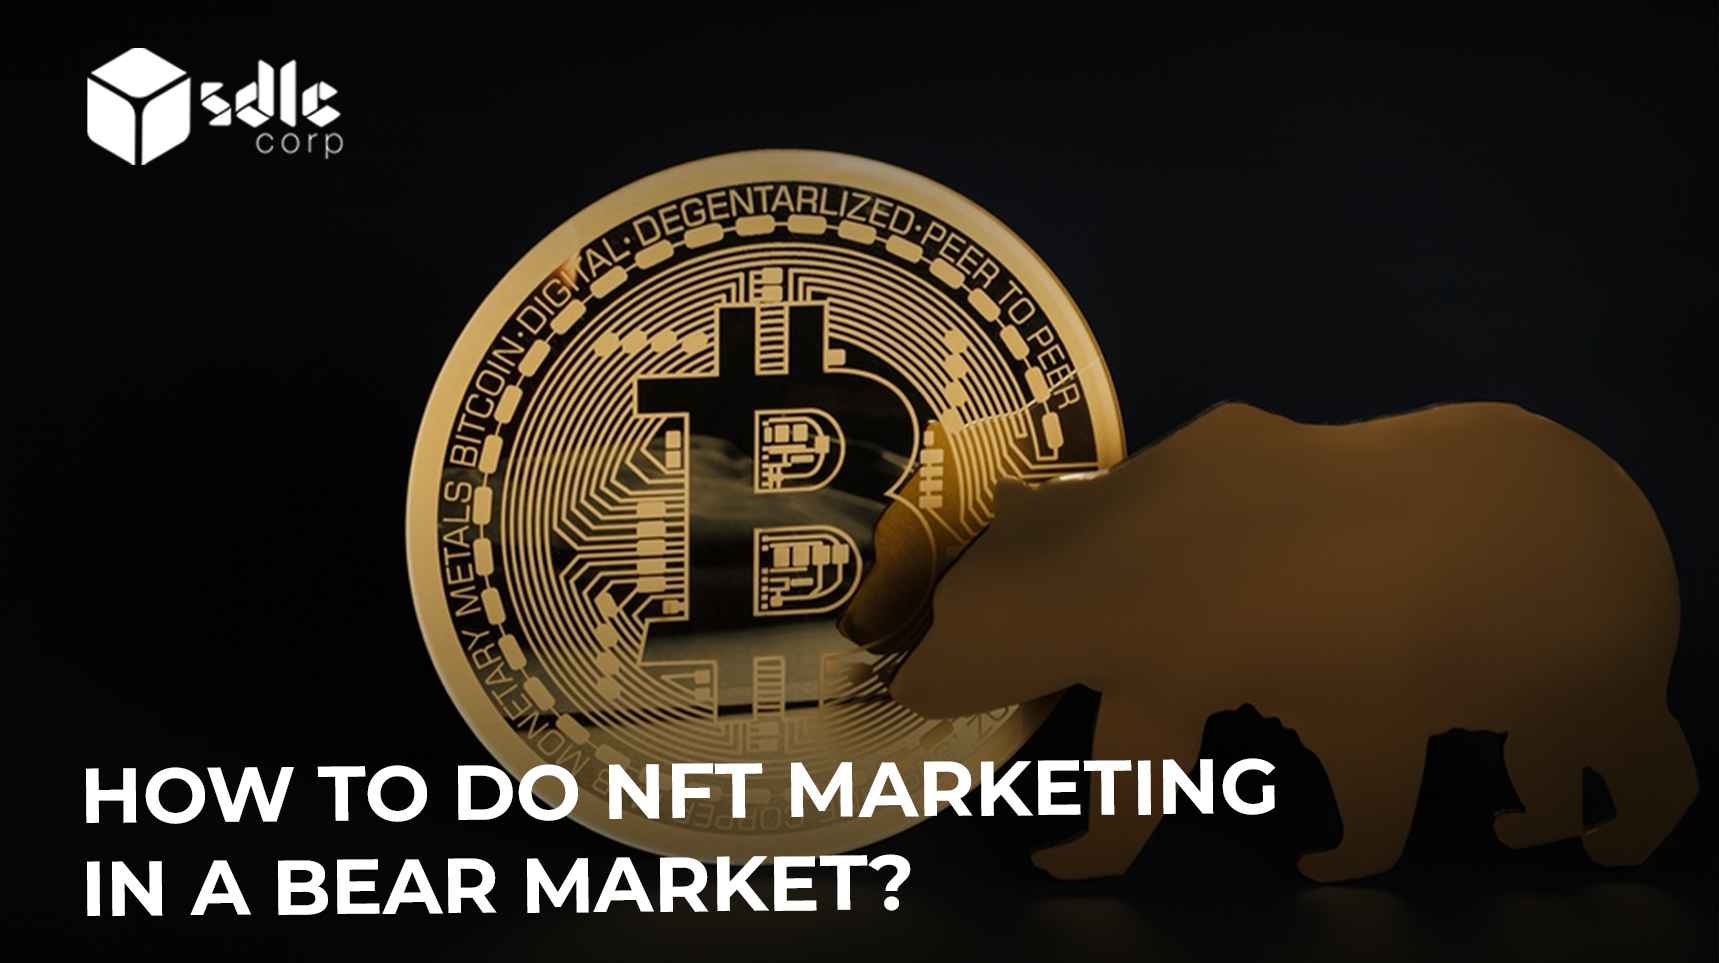 How to do NFT Marketing in a Bear Market?